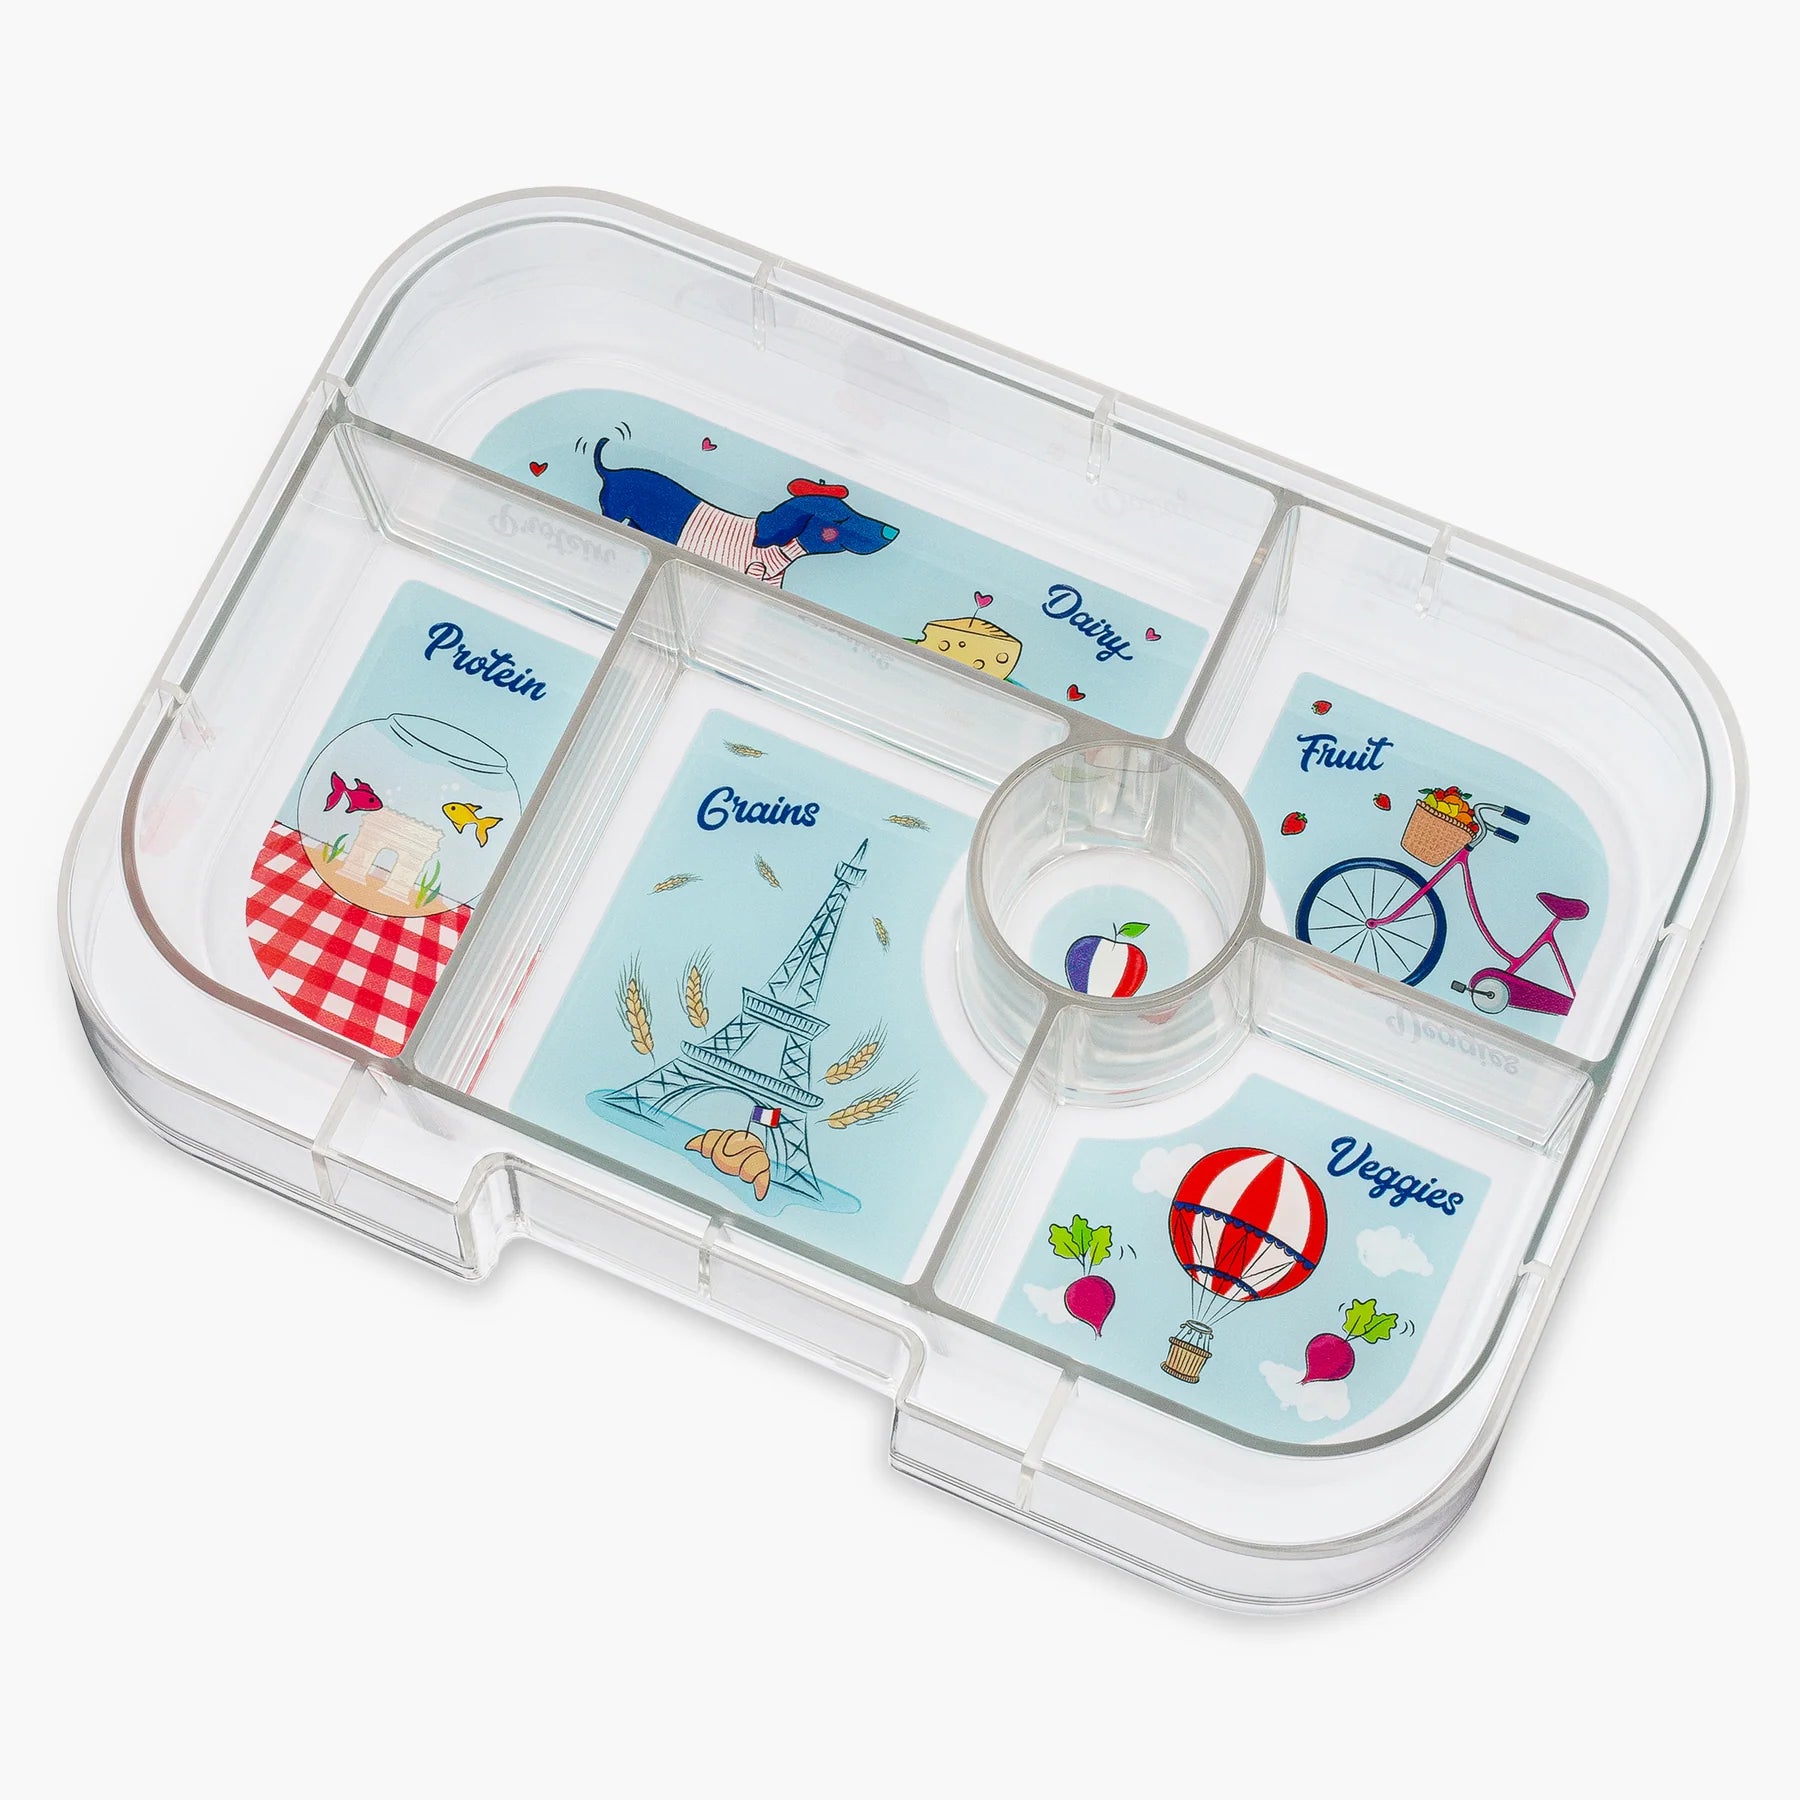  Yumbox Leakproof Snack Bento Box - 3 Compartment Leakproof Bento  Lunch Box for Kids; Perfect snack containers for toddlers or as a small  toddler lunch box (Misty Aqua with Rainbow Tray)